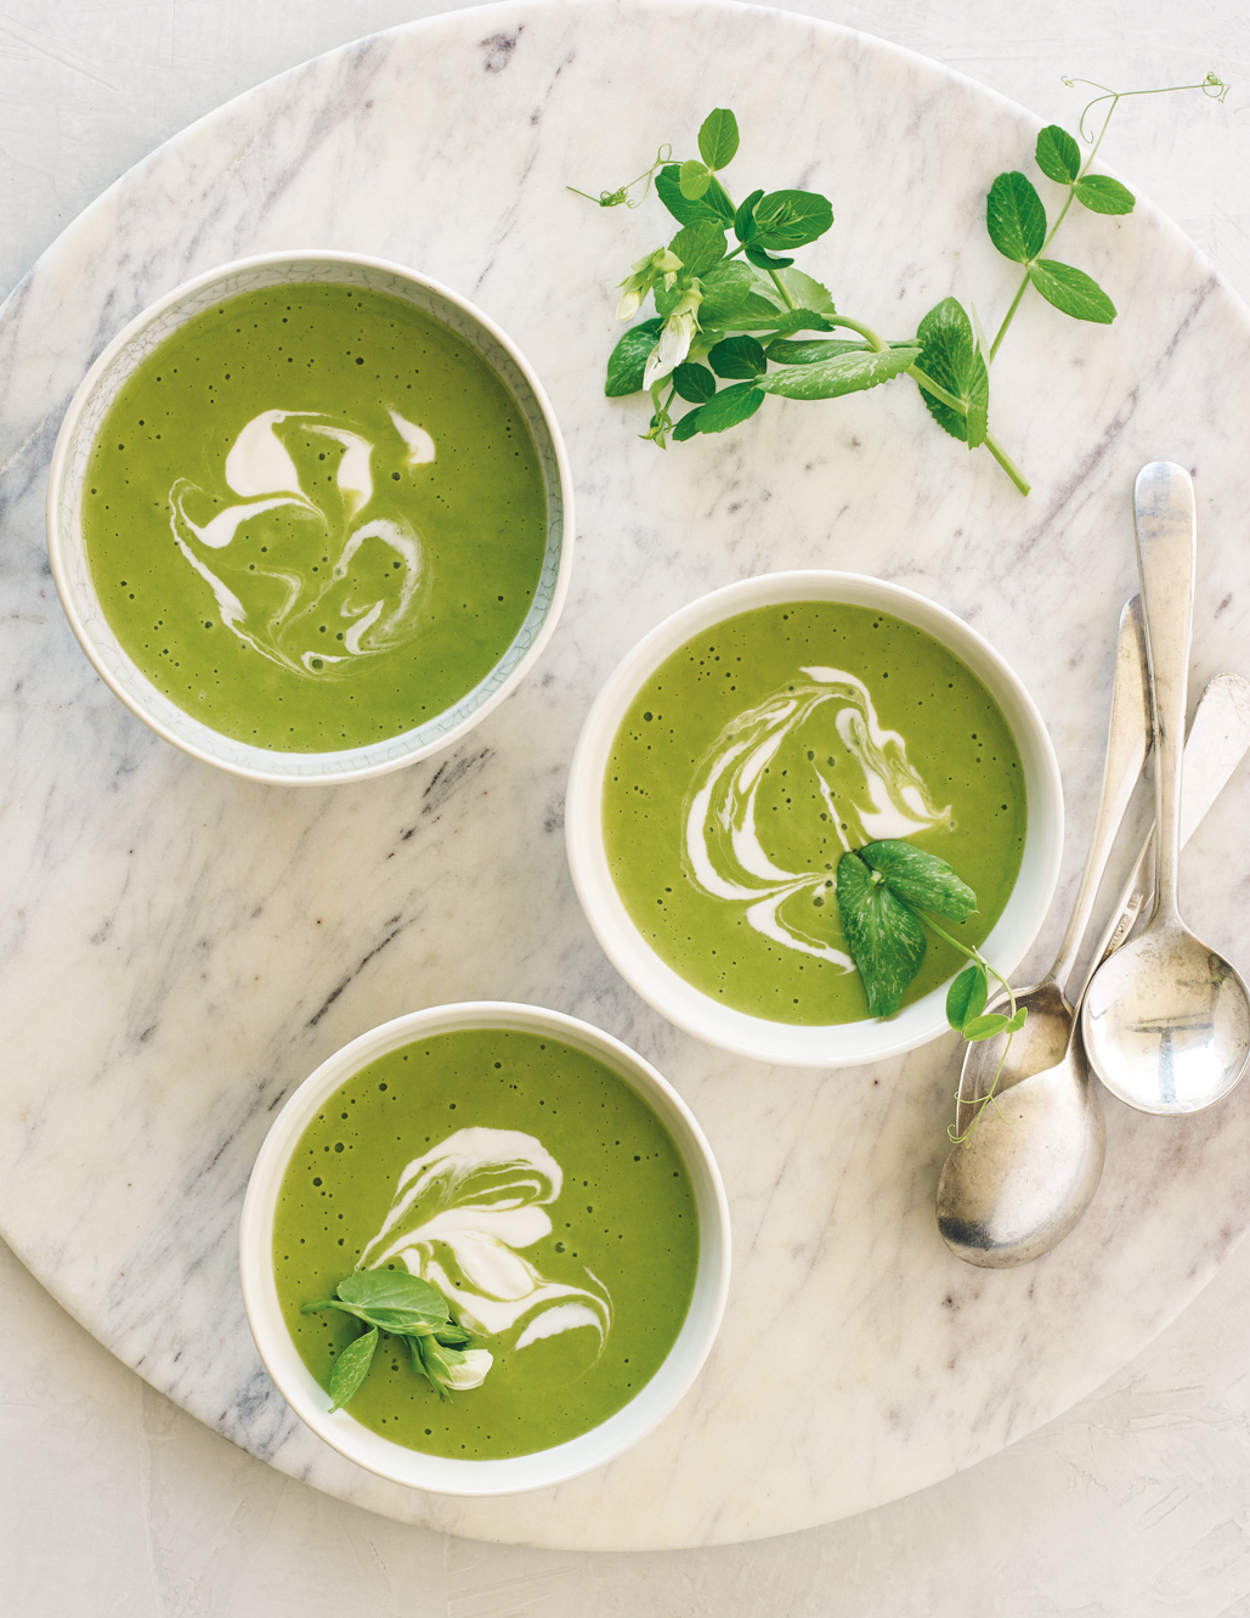 Los Angeles Food photographer - Cooking in Season  Cookbook Pea Soup  by Ray Kachatorian